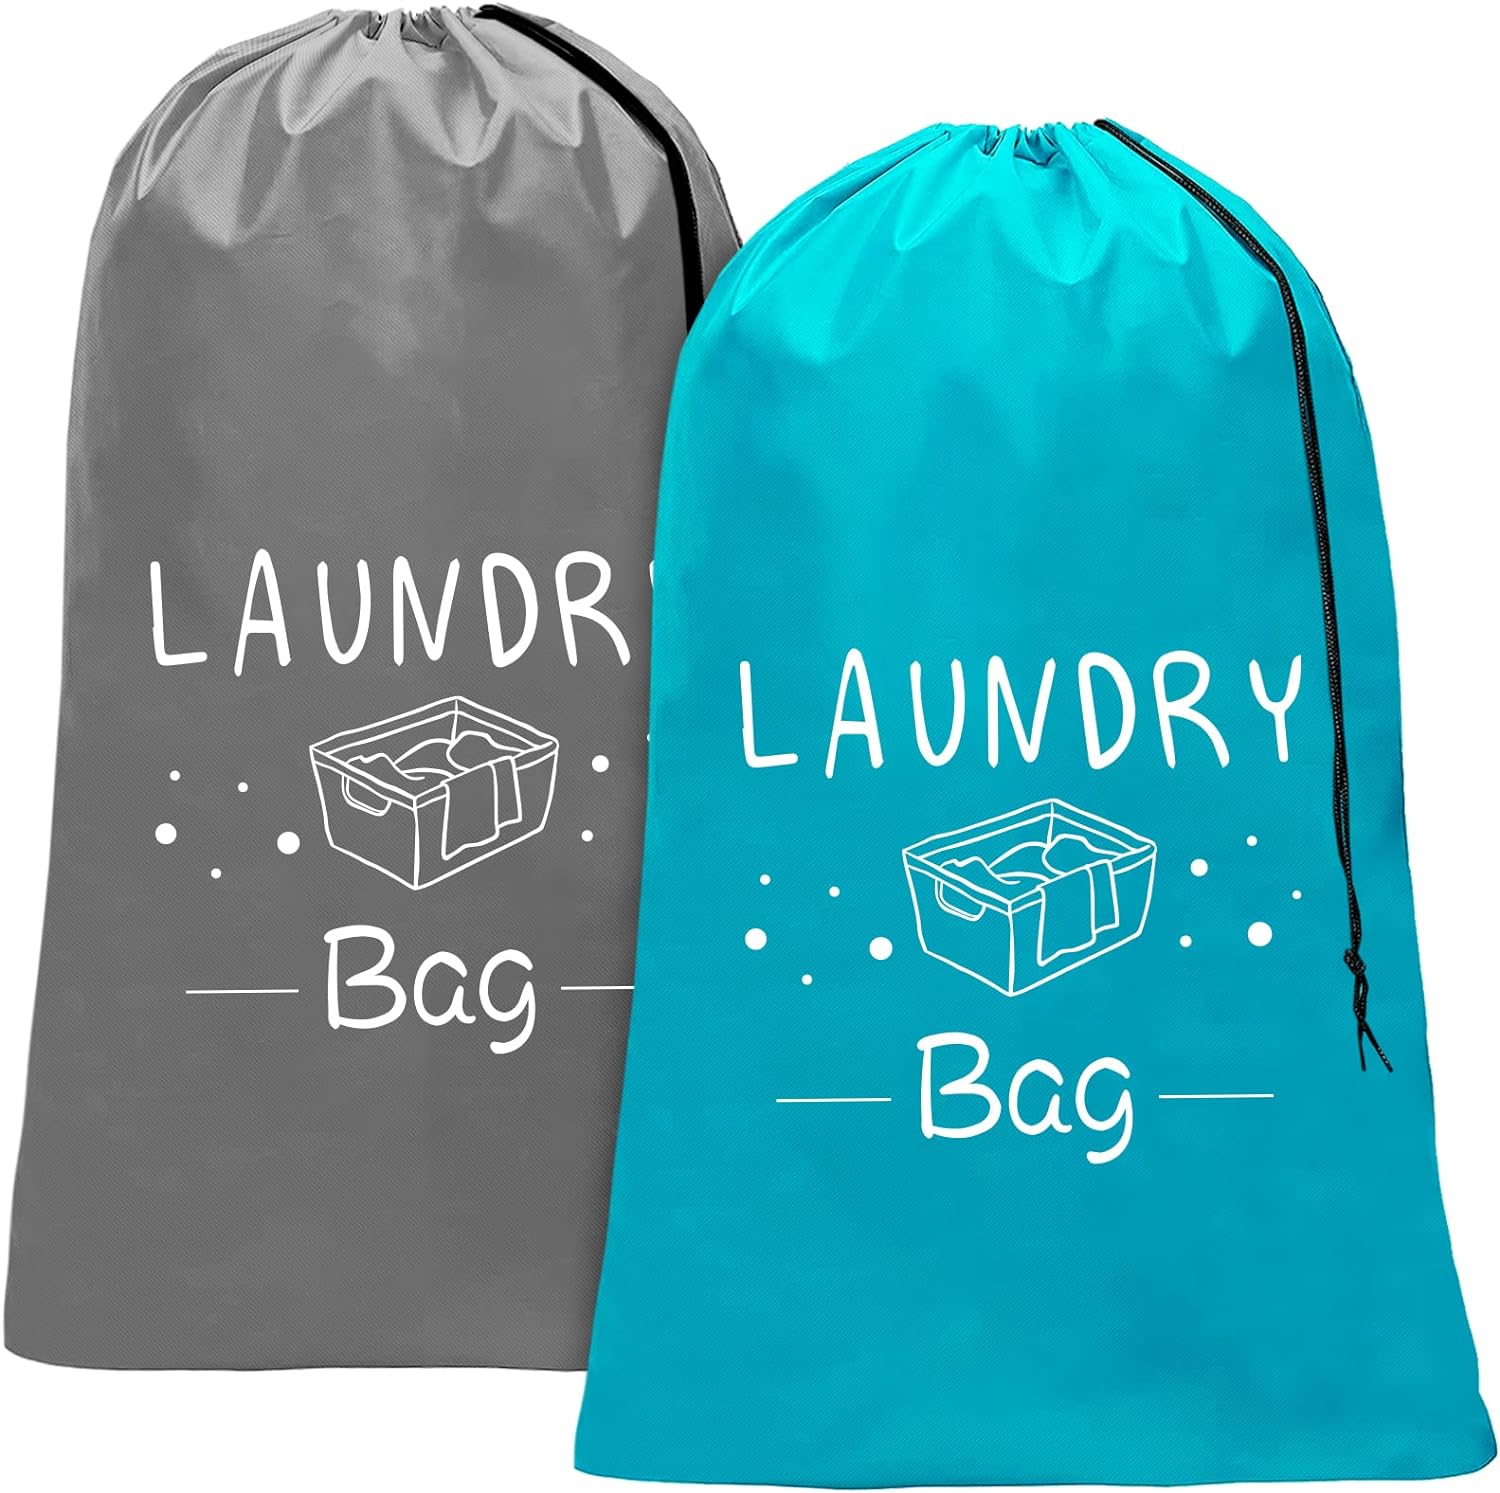 Sylfairy 2 Pack Extra Large Travel Laundry Bag, Durable Rip-Stop Dirty Clothes Shoulder Bag with Drawstring, Heavy Duty Travel Laundry Bag, Large Laundry Hamper Liner